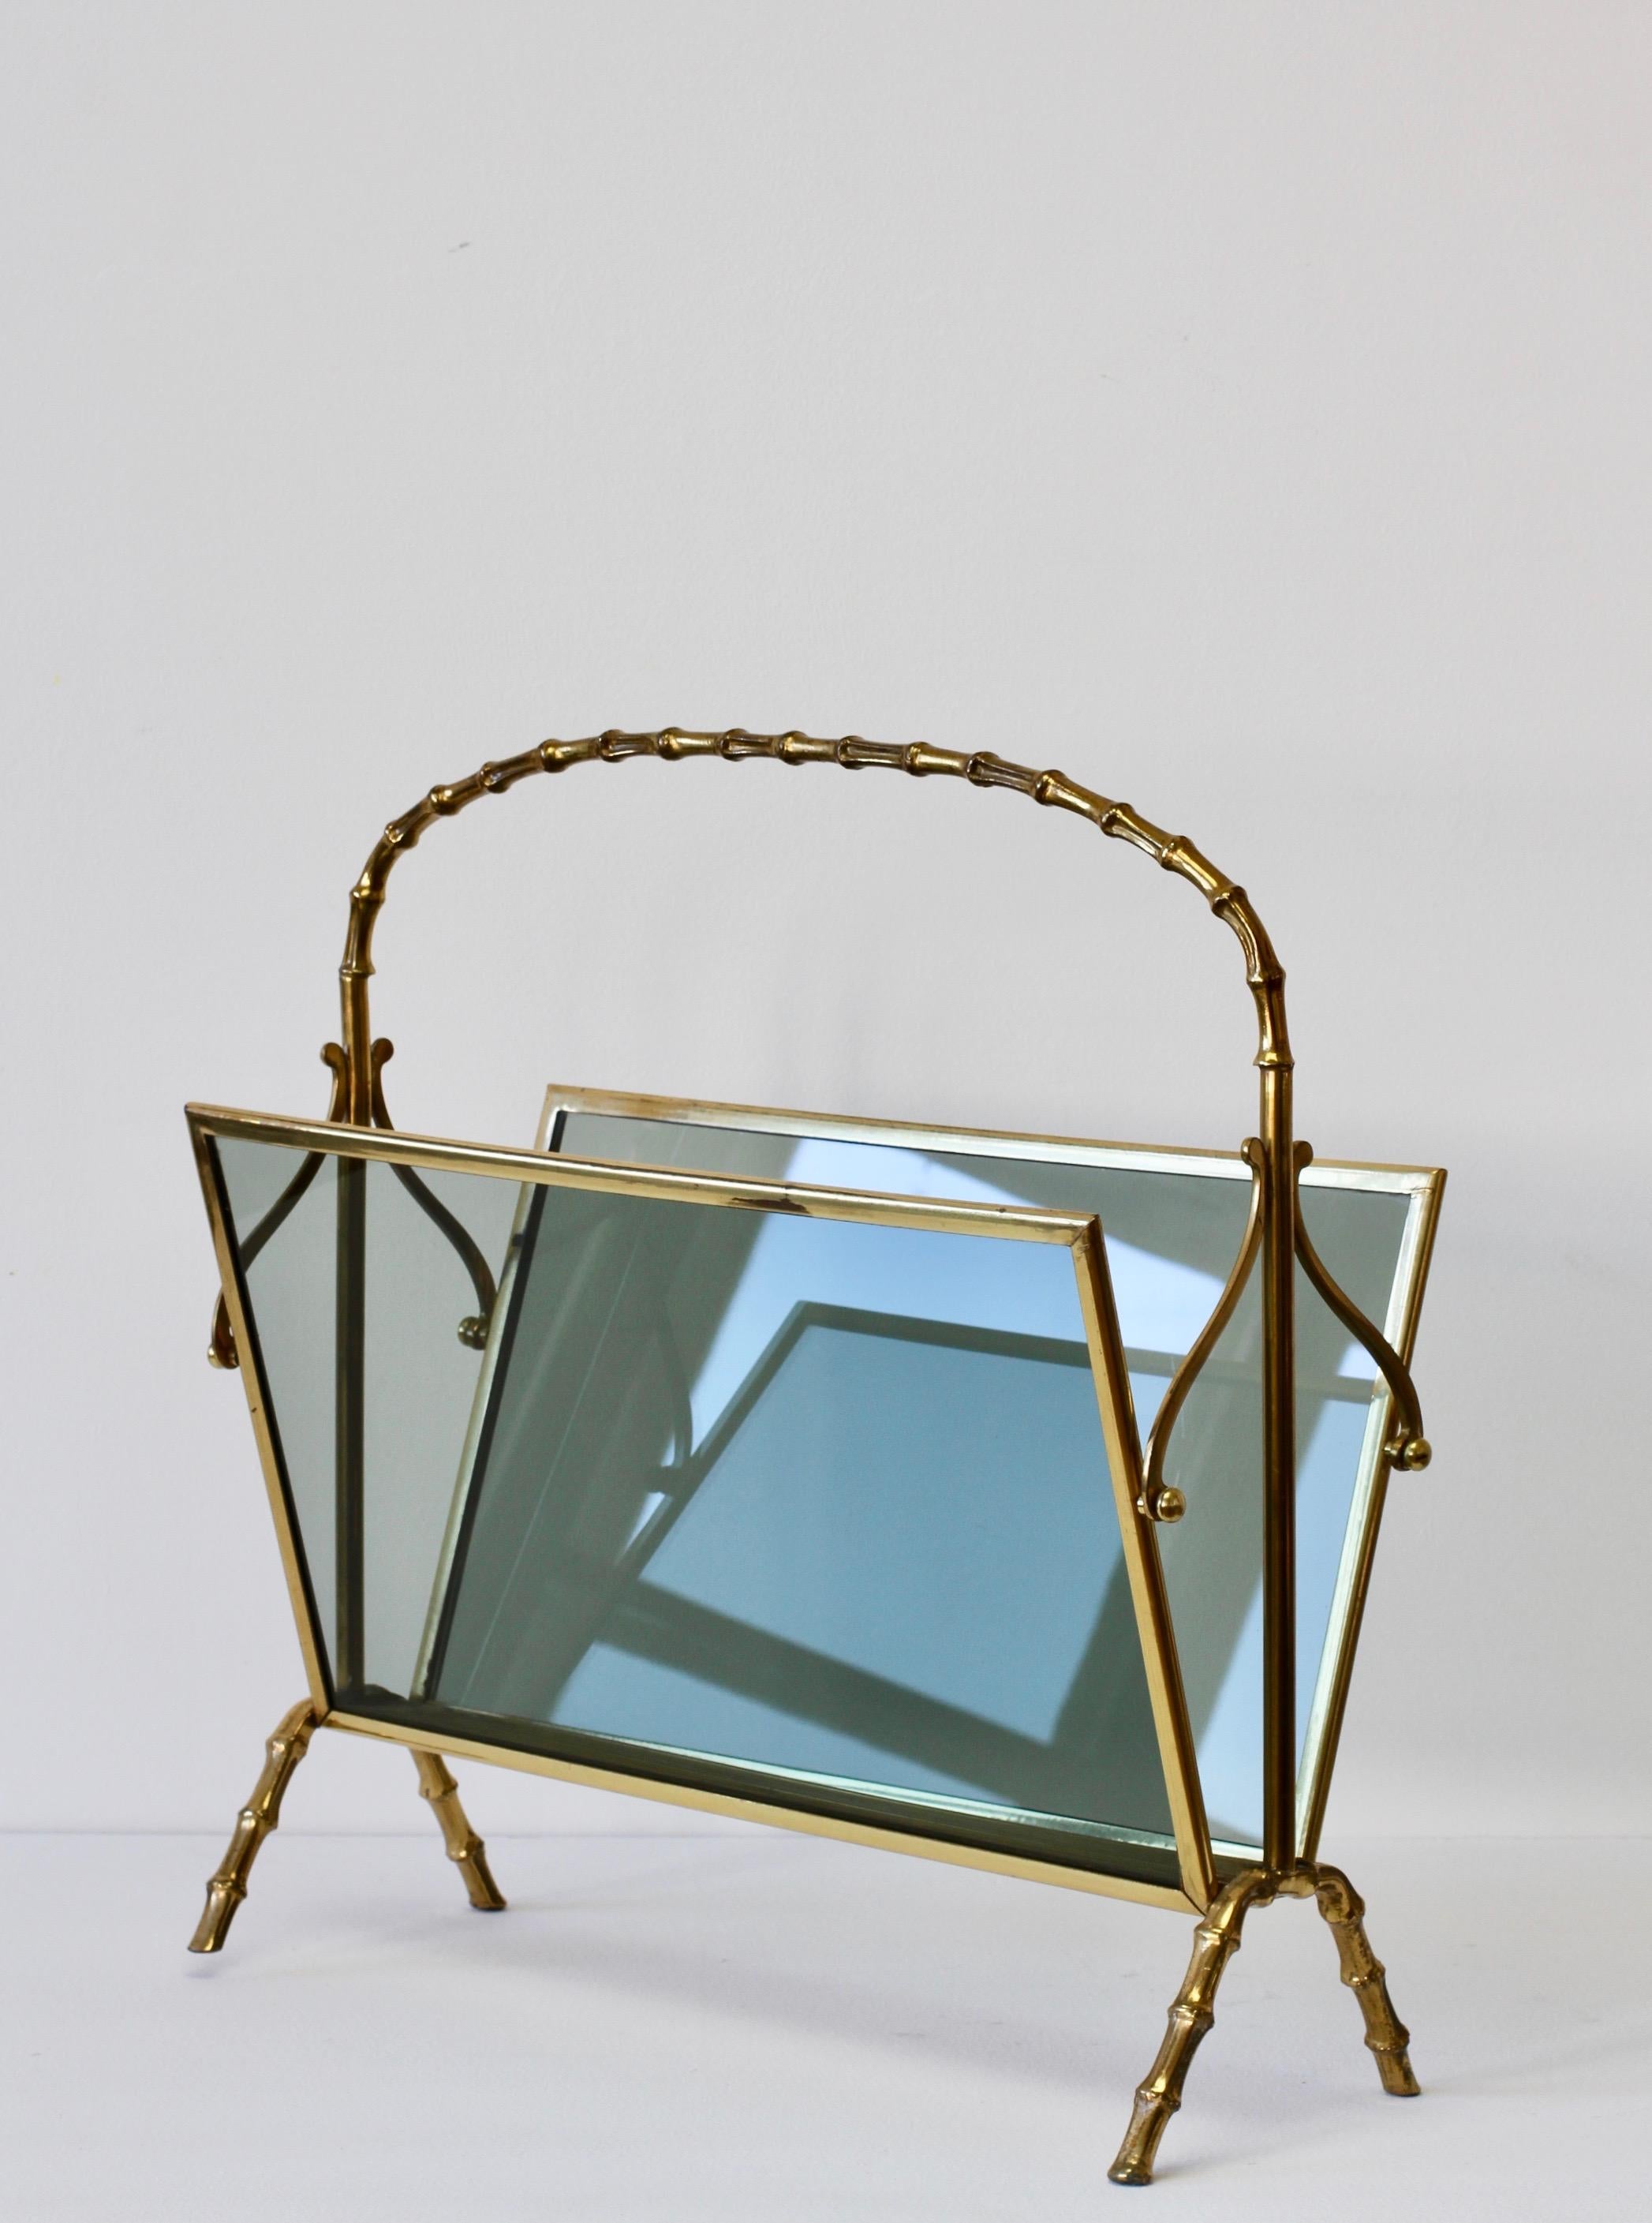 20th Century Maison Baguès Attributed Cast Brass Faux Bamboo Magazine Rack or Newspaper Stand For Sale